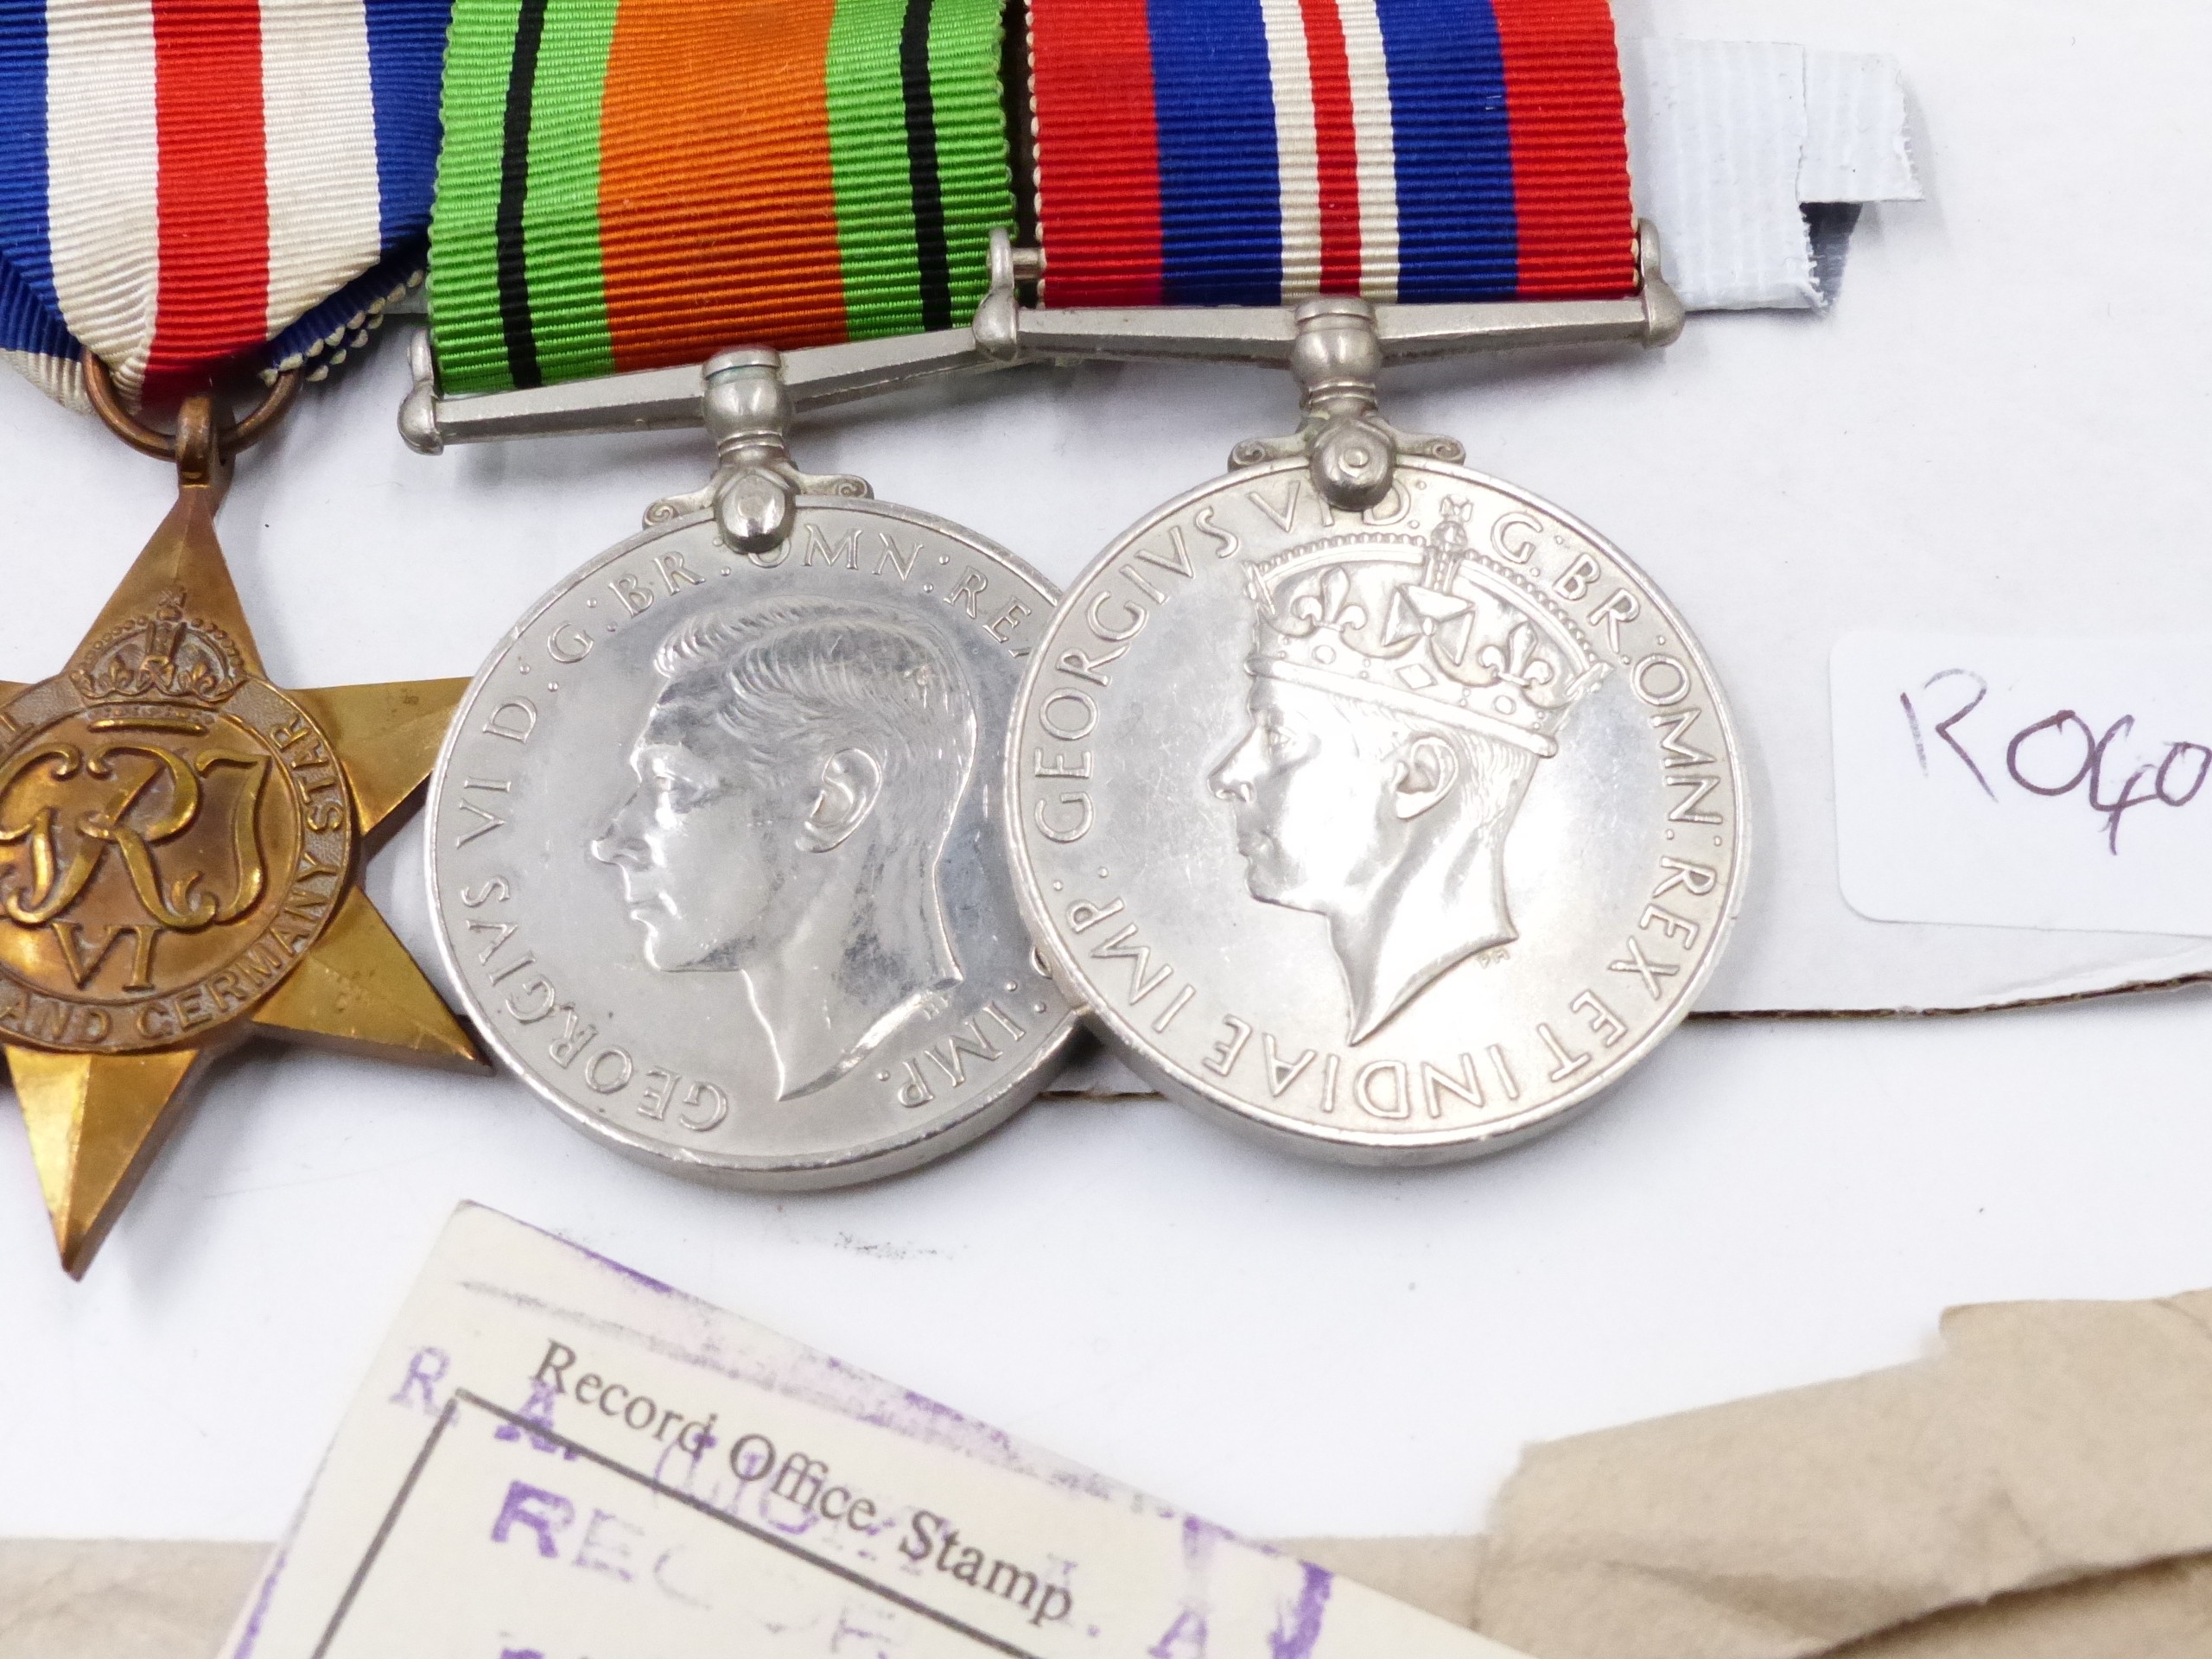 A GROUP OF FIVE WWII MEDALS AND RELATED EPHEMERA TO 1609117 FRED ALCOCK. - Image 8 of 12